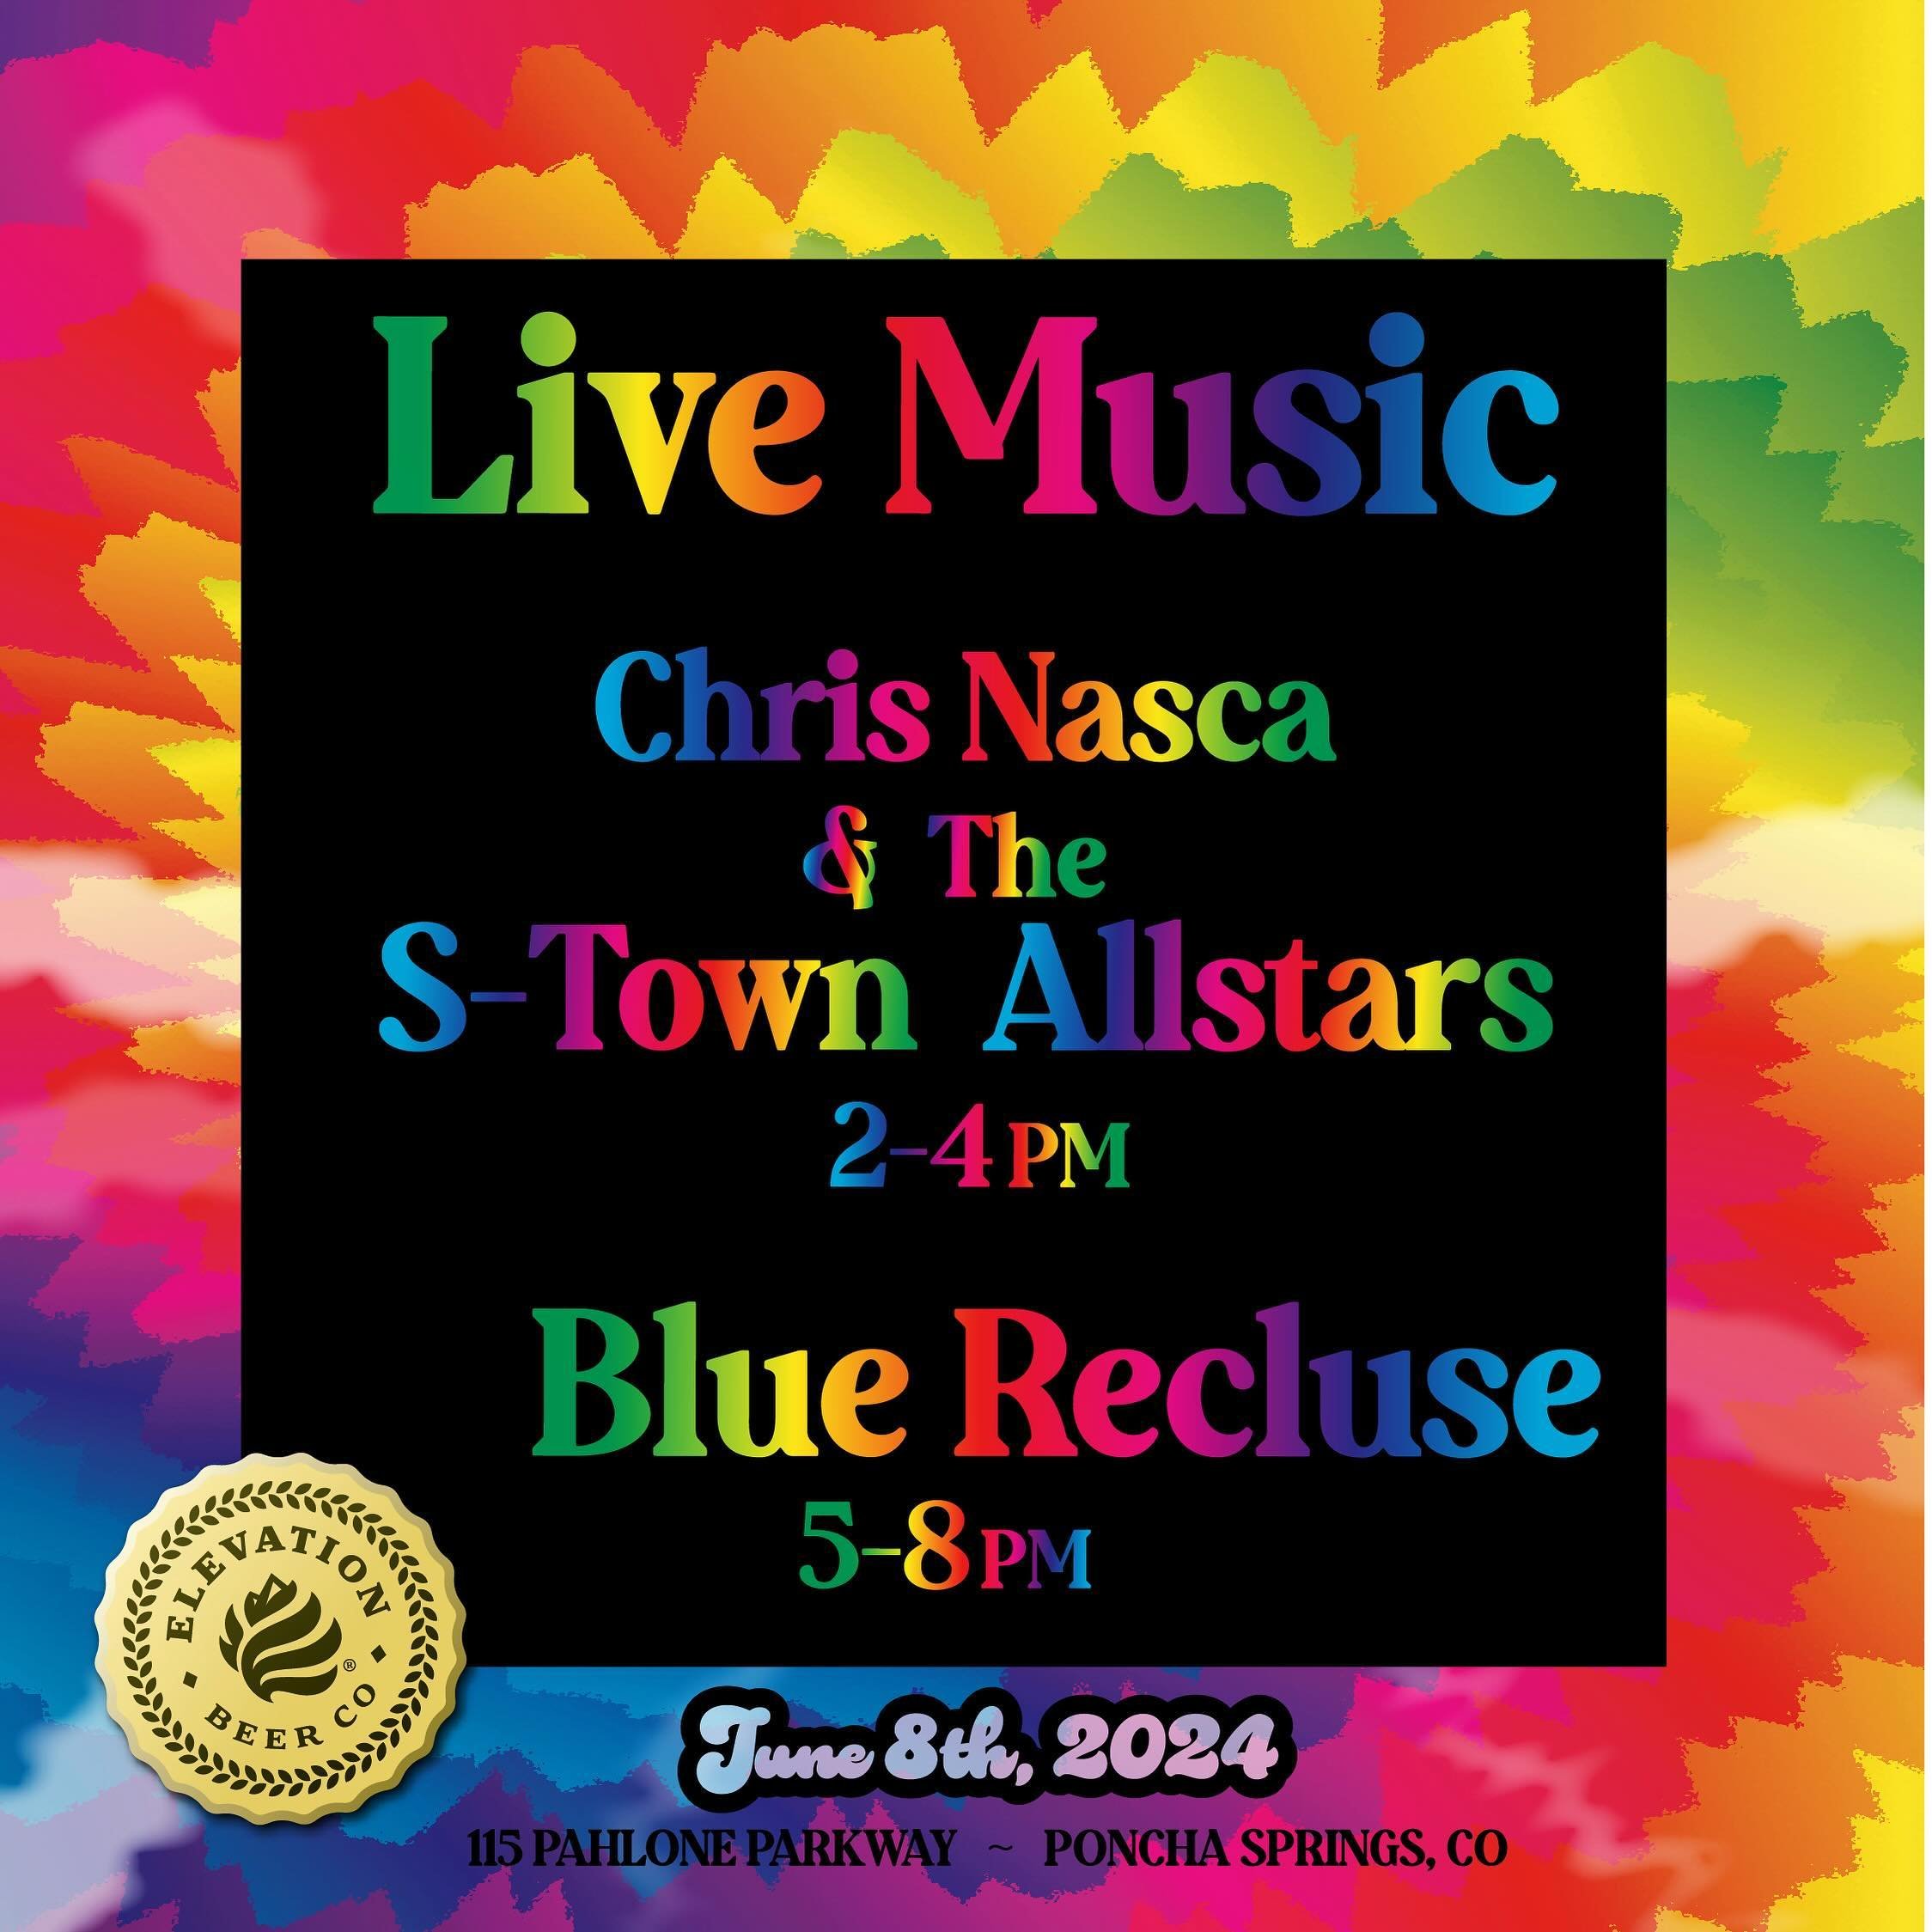 We&rsquo;ve got a killer live music lineup for our 12th Anniversary party! Turn on, tune in, and drop out to the groovy tunes of Chris Nasca &amp; The S-Town Allstars and Blue Recluse.